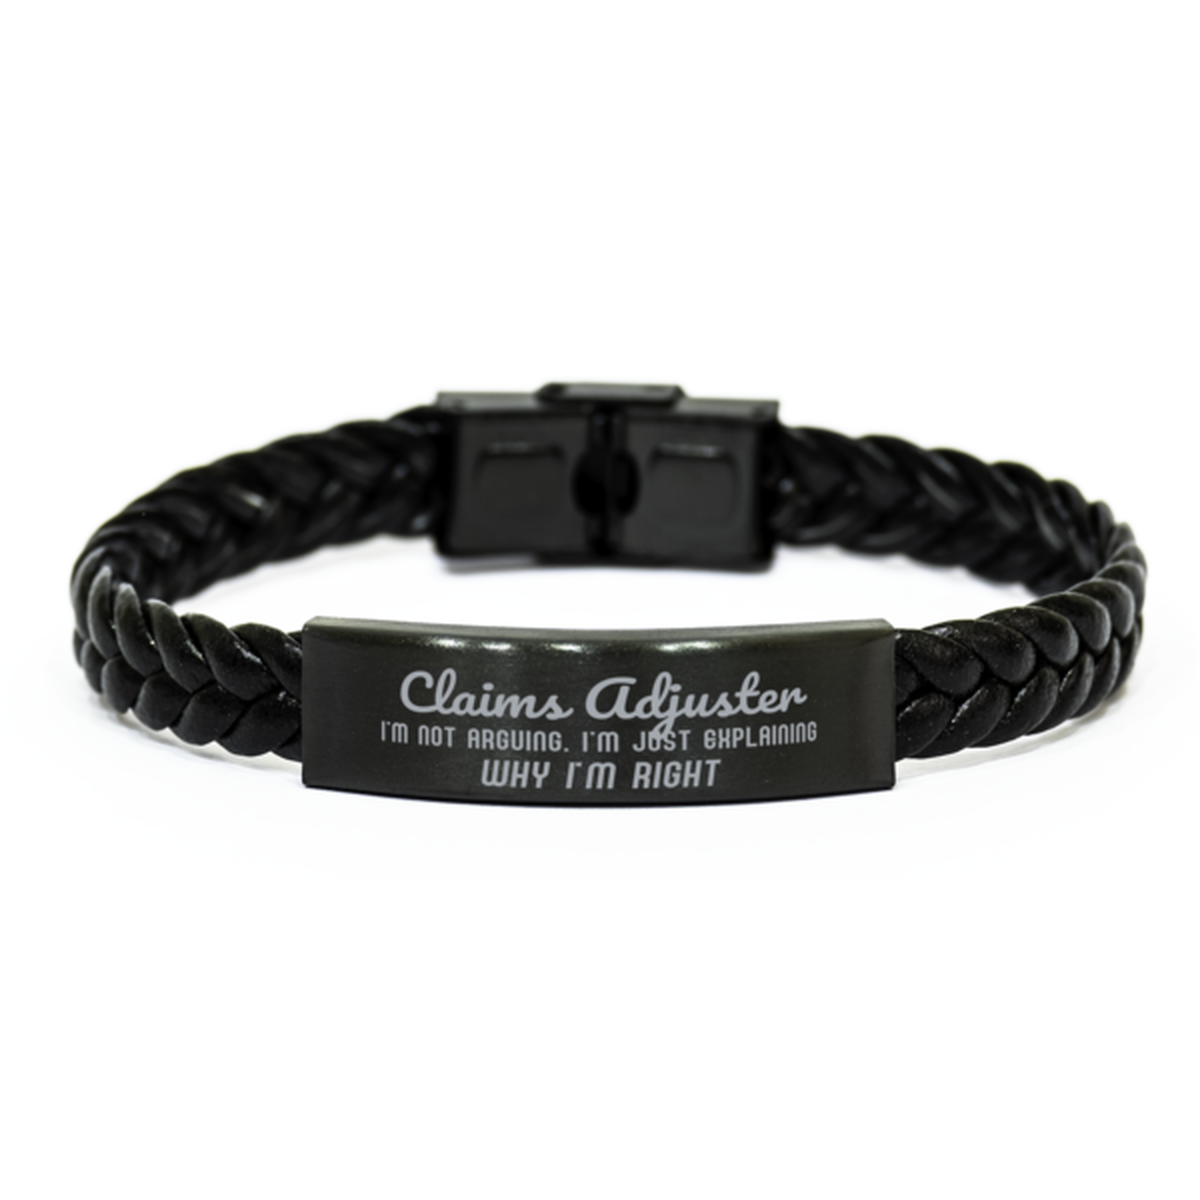 Claims Adjuster I'm not Arguing. I'm Just Explaining Why I'm RIGHT Braided Leather Bracelet, Graduation Birthday Christmas Claims Adjuster Gifts For Claims Adjuster Funny Saying Quote Present for Men Women Coworker